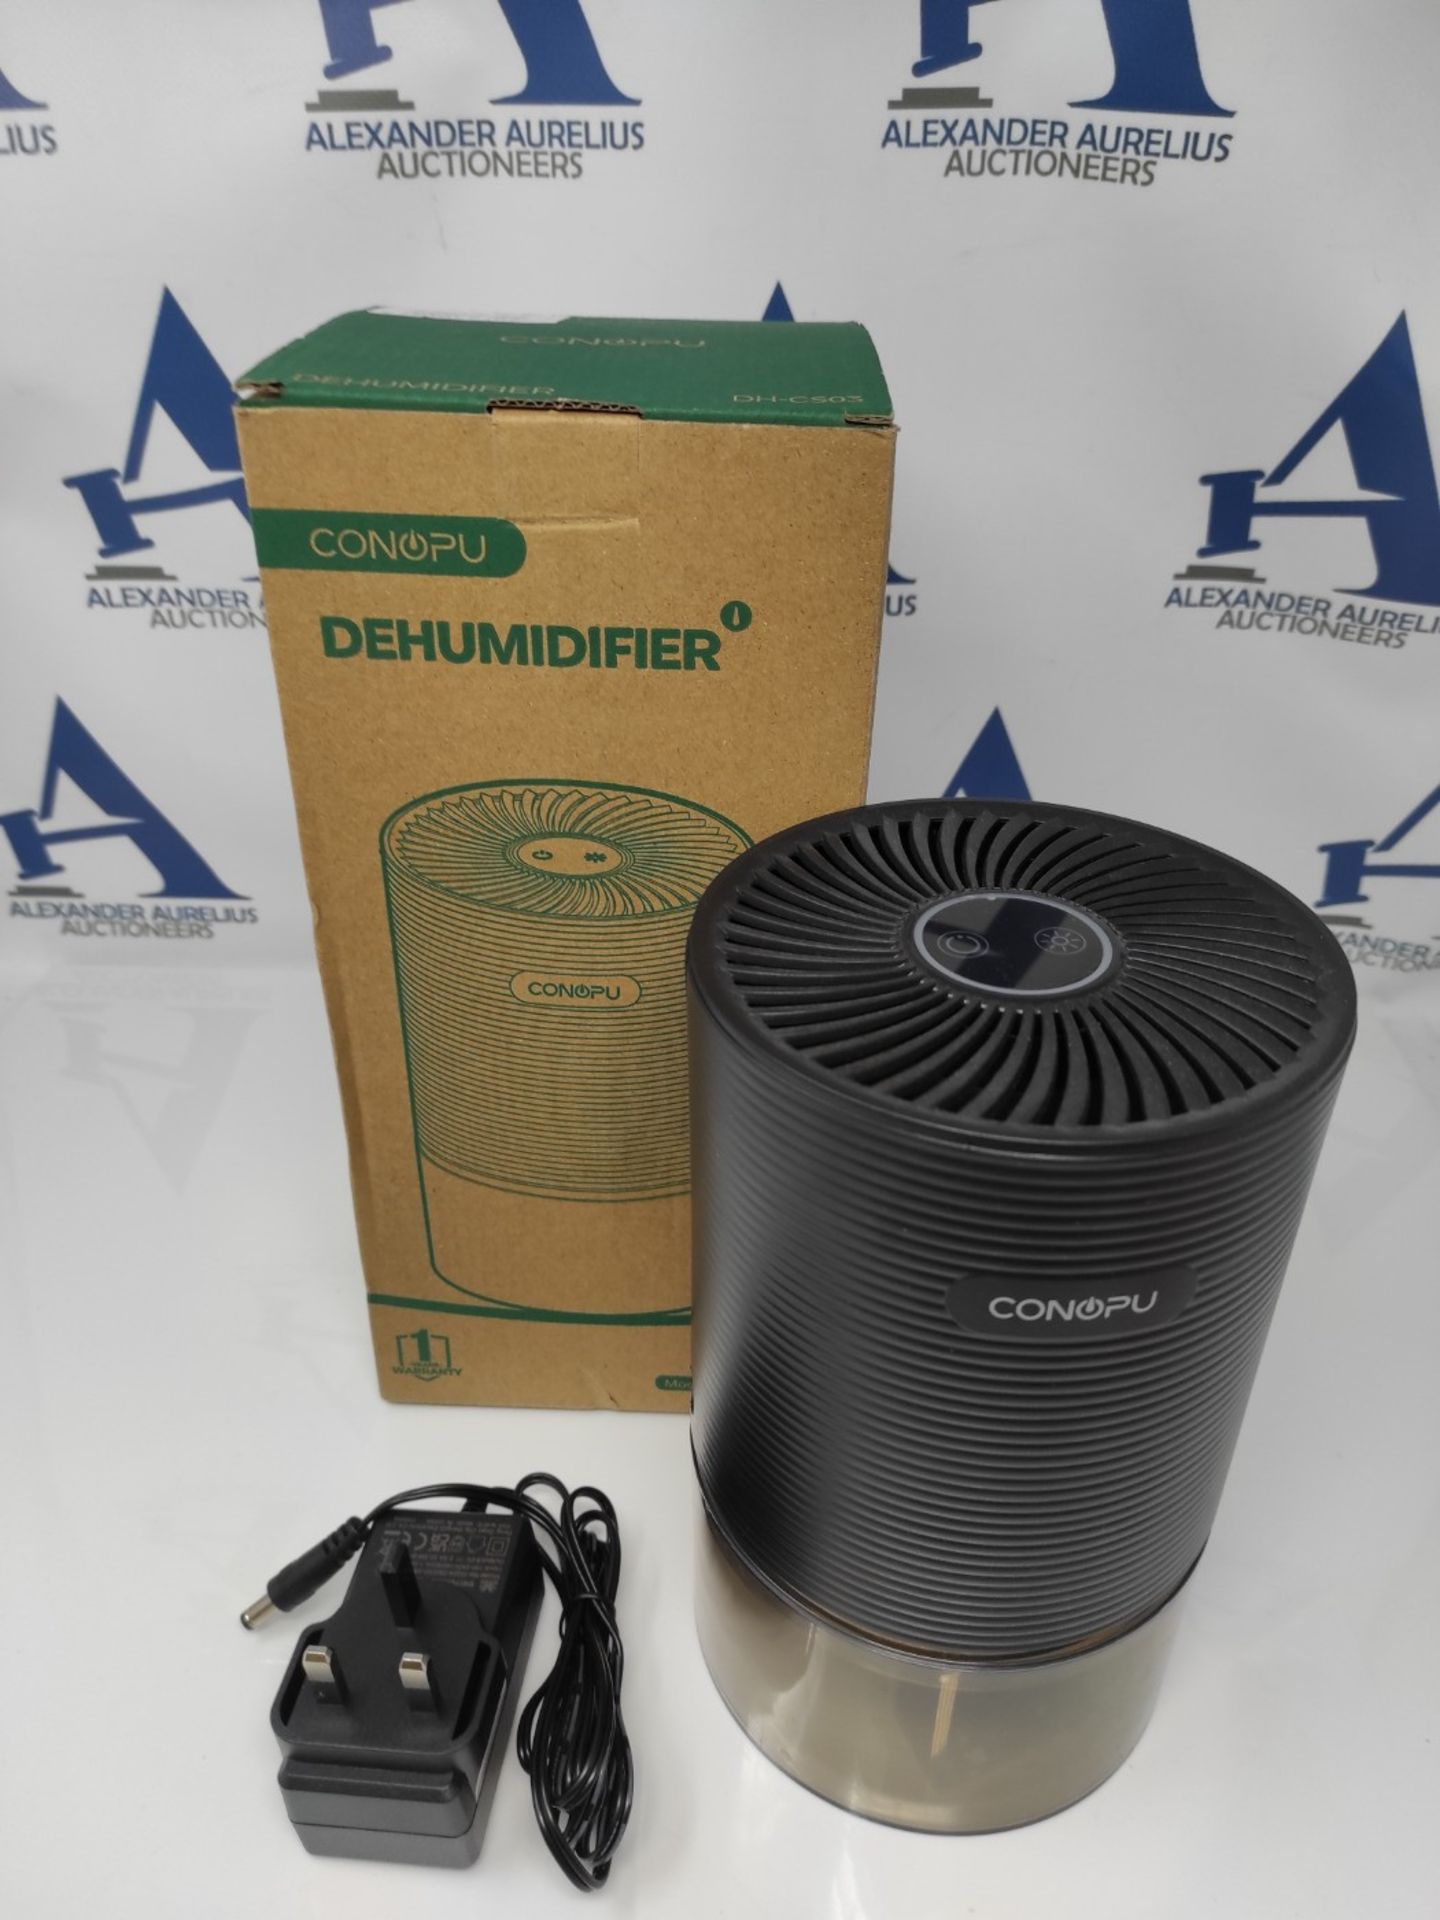 CONOPU Dehumidifiers for Home Drying Clothes Damp, Portable Dehumidifier for Bedroom w - Image 2 of 2